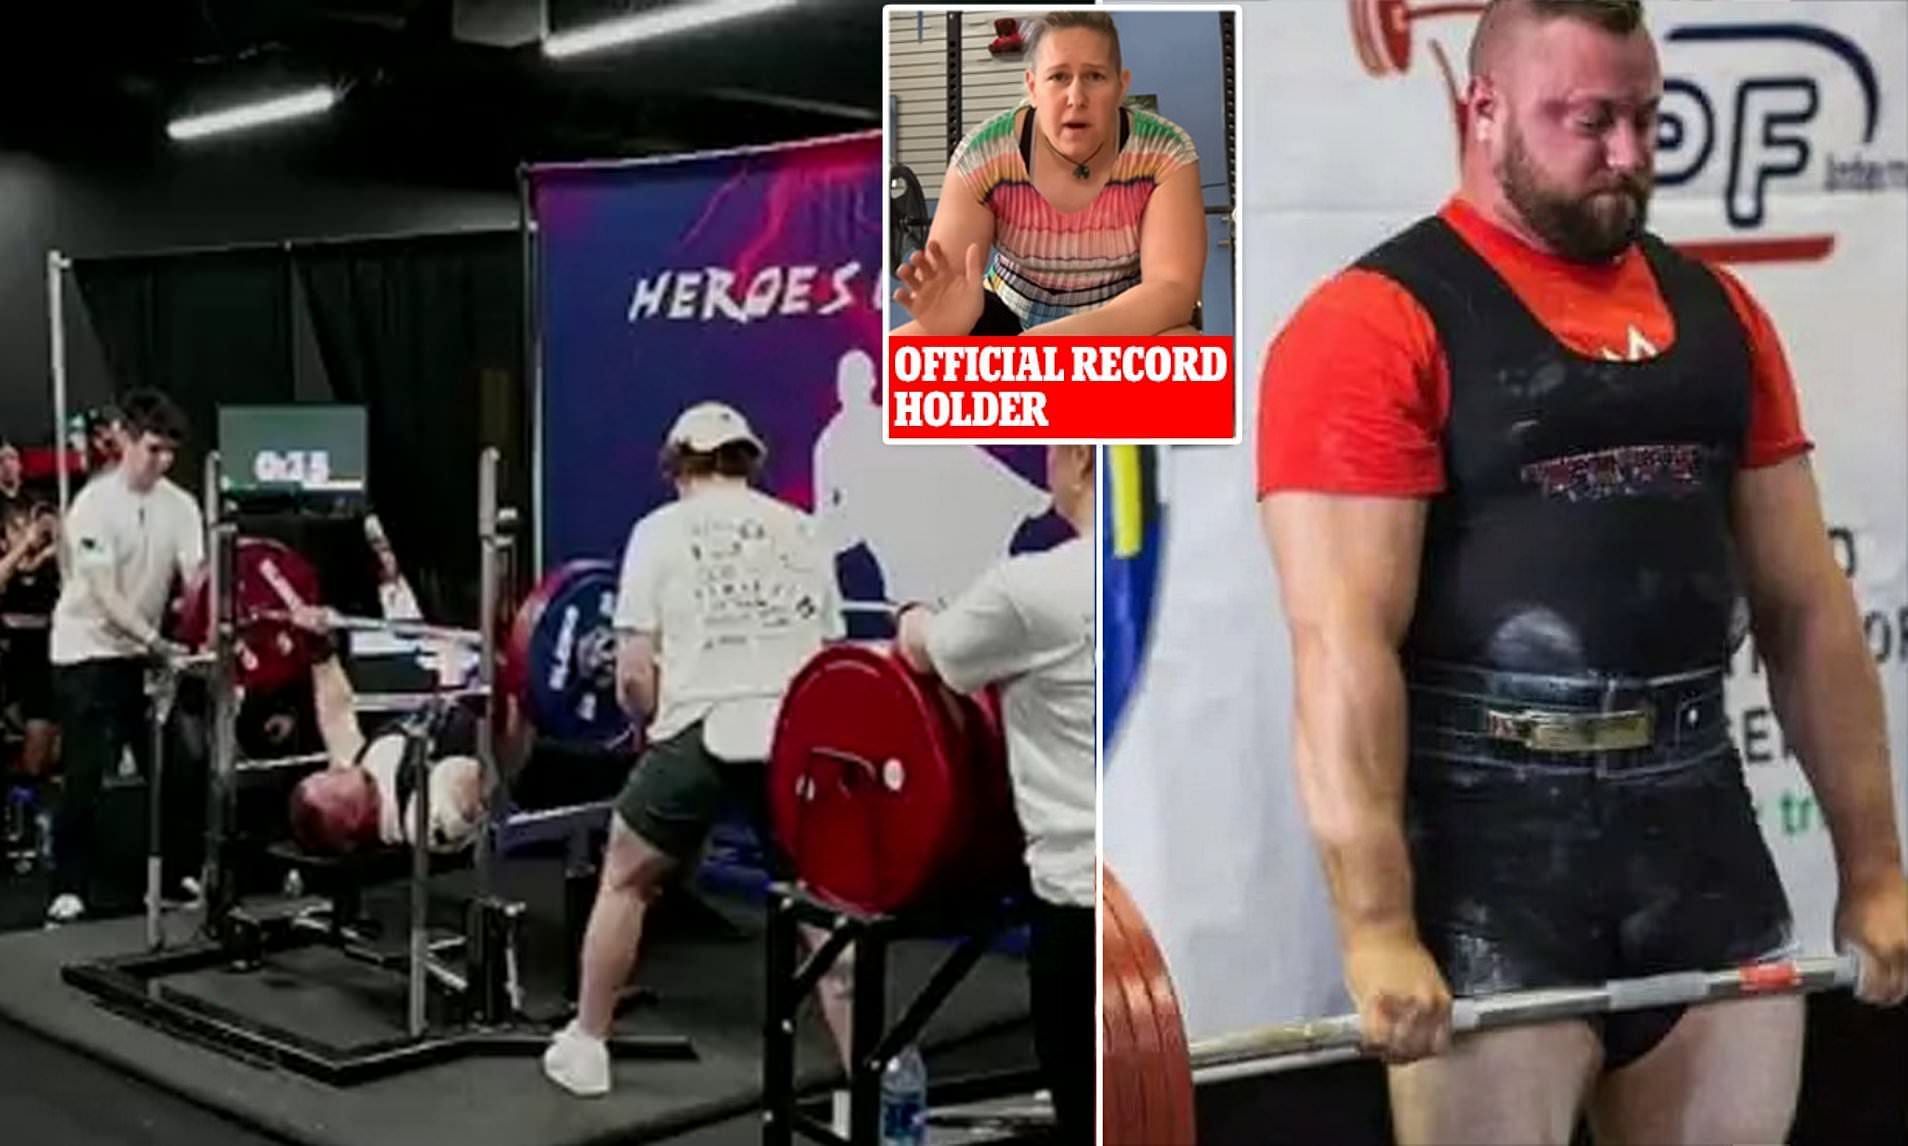 At the &quot;Heroes Classic,&quot; Avi Silverberg, the powerlifting coach of Team Canada, set a new record for the Alberta bench press in the 84+ kg category for women (Image via Daily mail uk)